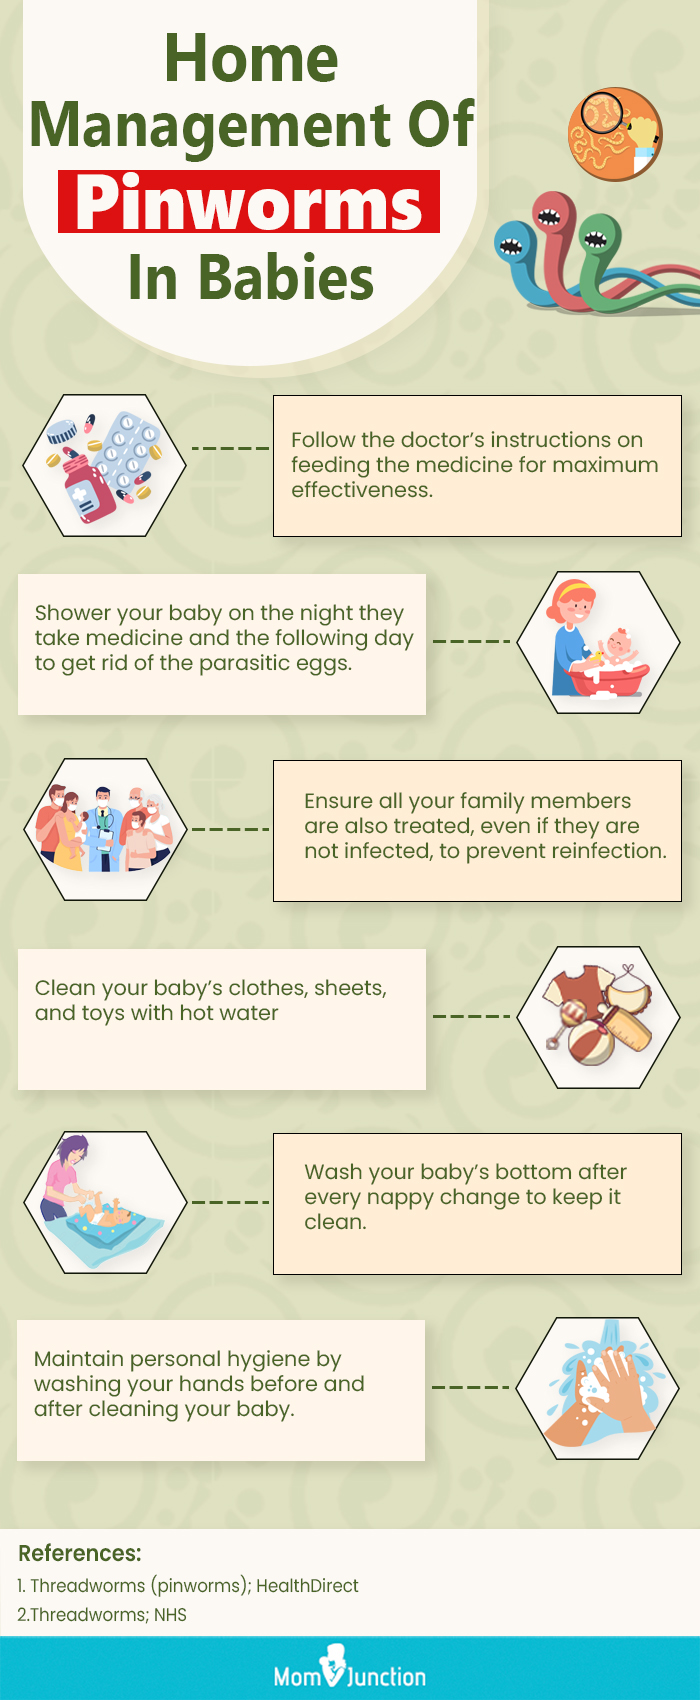 home management of pinworms in babies (infographic)